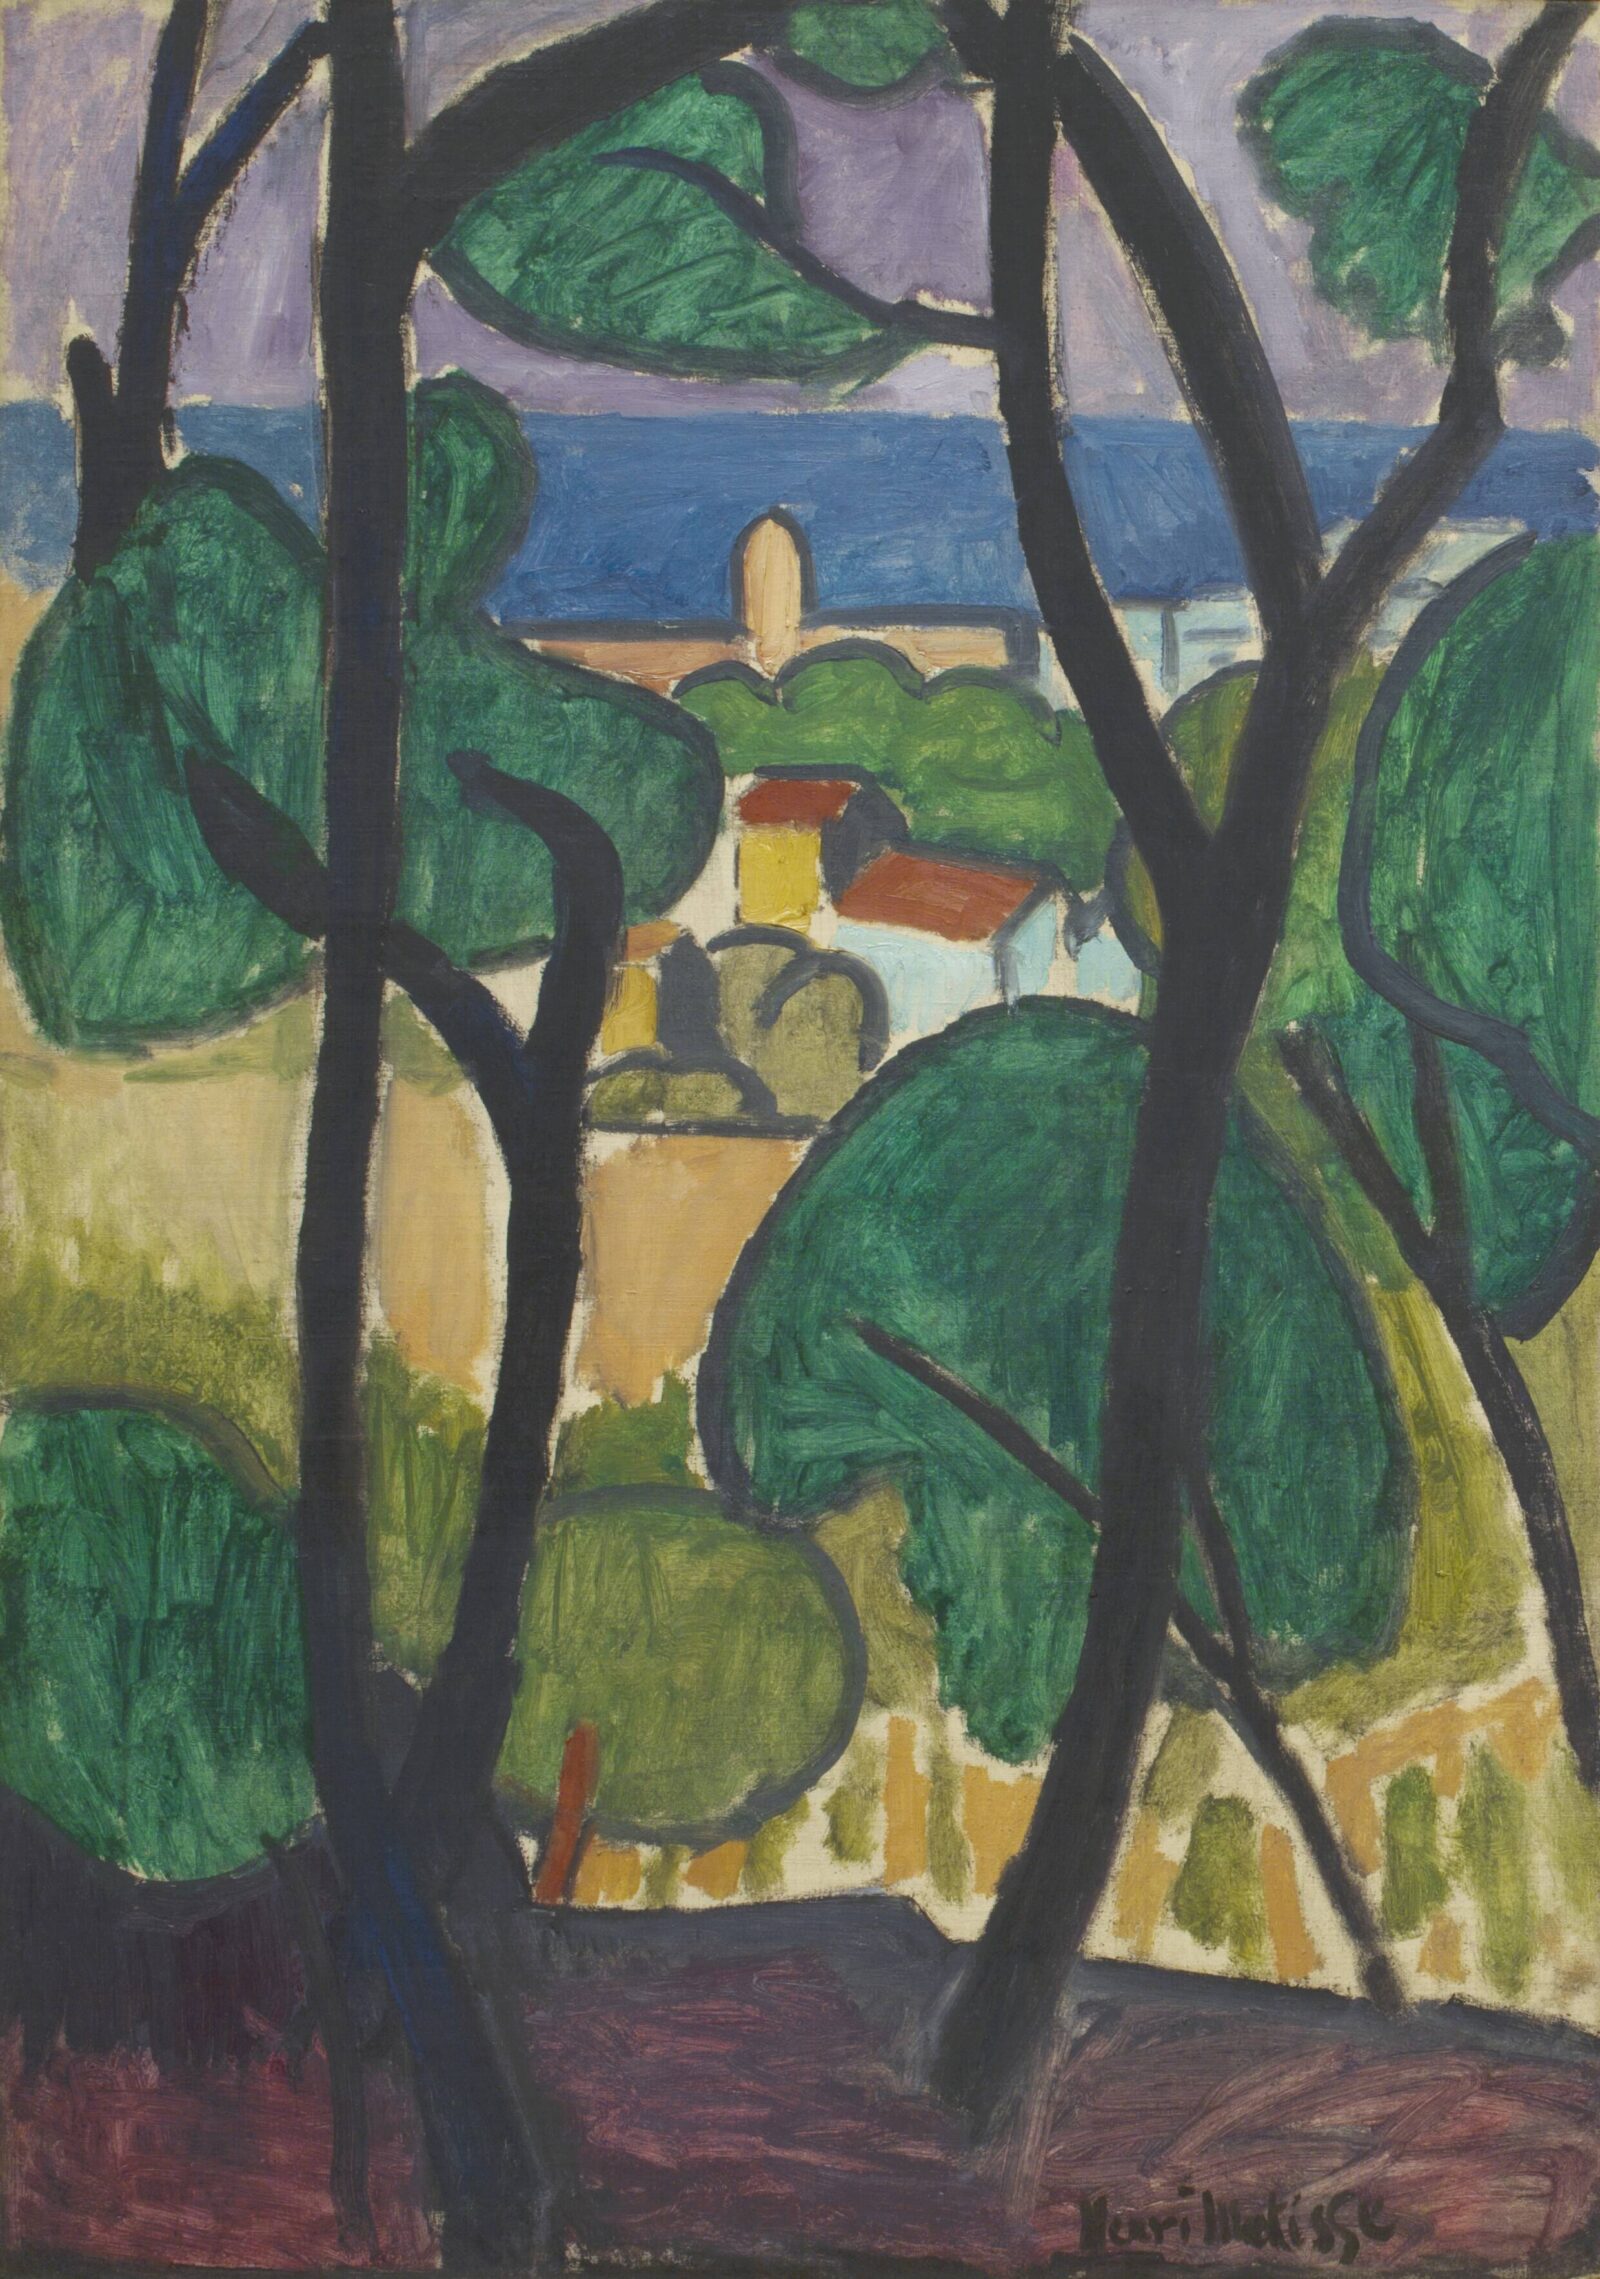 Henri Matisse, View of Collioure, 1907, oil on canvas, the Metropolitan Museum of Art, New York, Jacques and Natasha Gelman Collection, 1998. © 2023 Succession H. Matisse / Artists Rights Society (ARS), New York